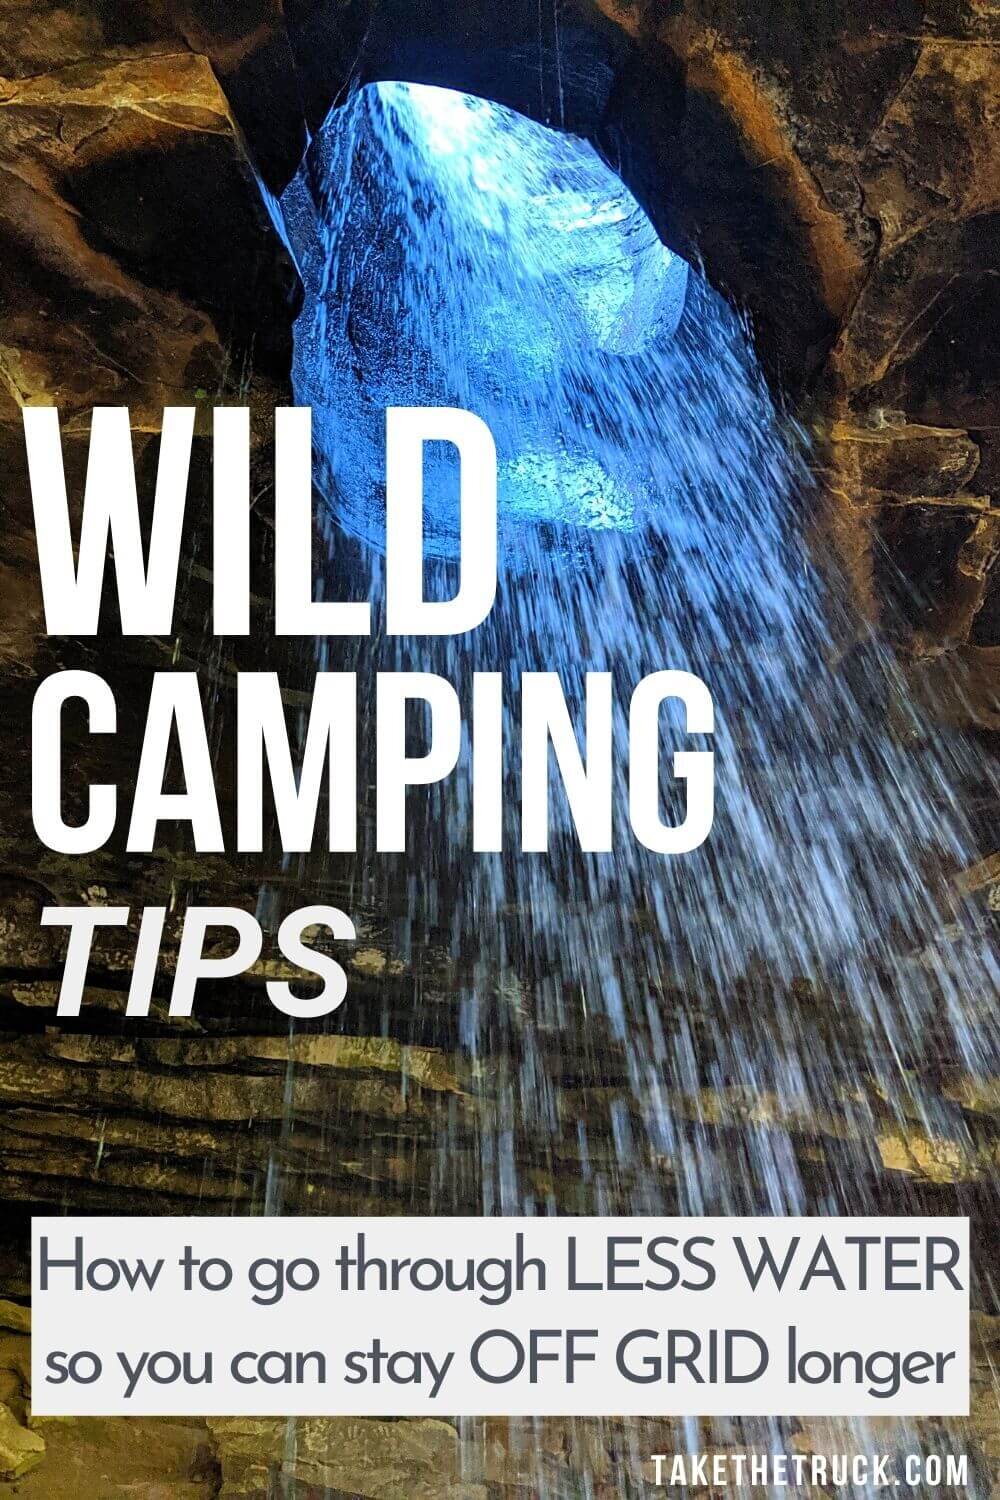 This post is all about wild camping hacks and boondocking tips about conserving water when camping with no hookups. Special tips for saving water when tent, car or truck camping with little water.